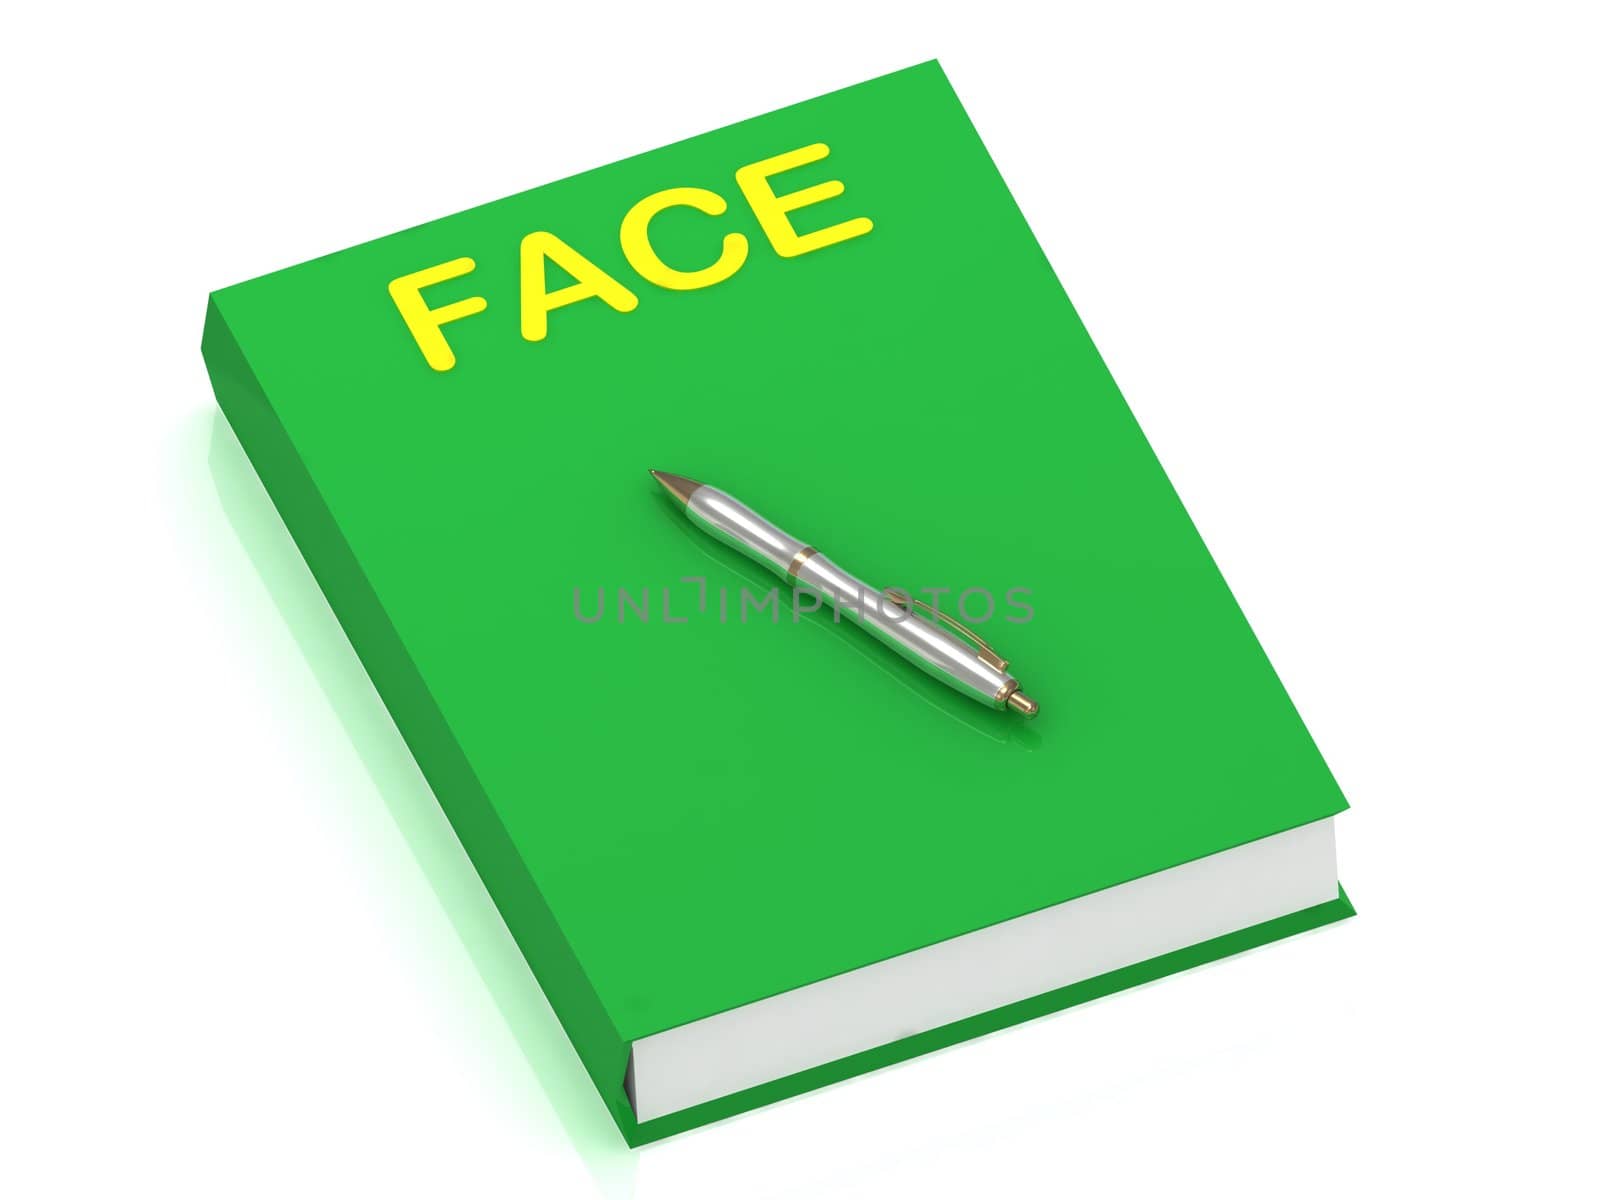 FACE name on cover book by GreenMost